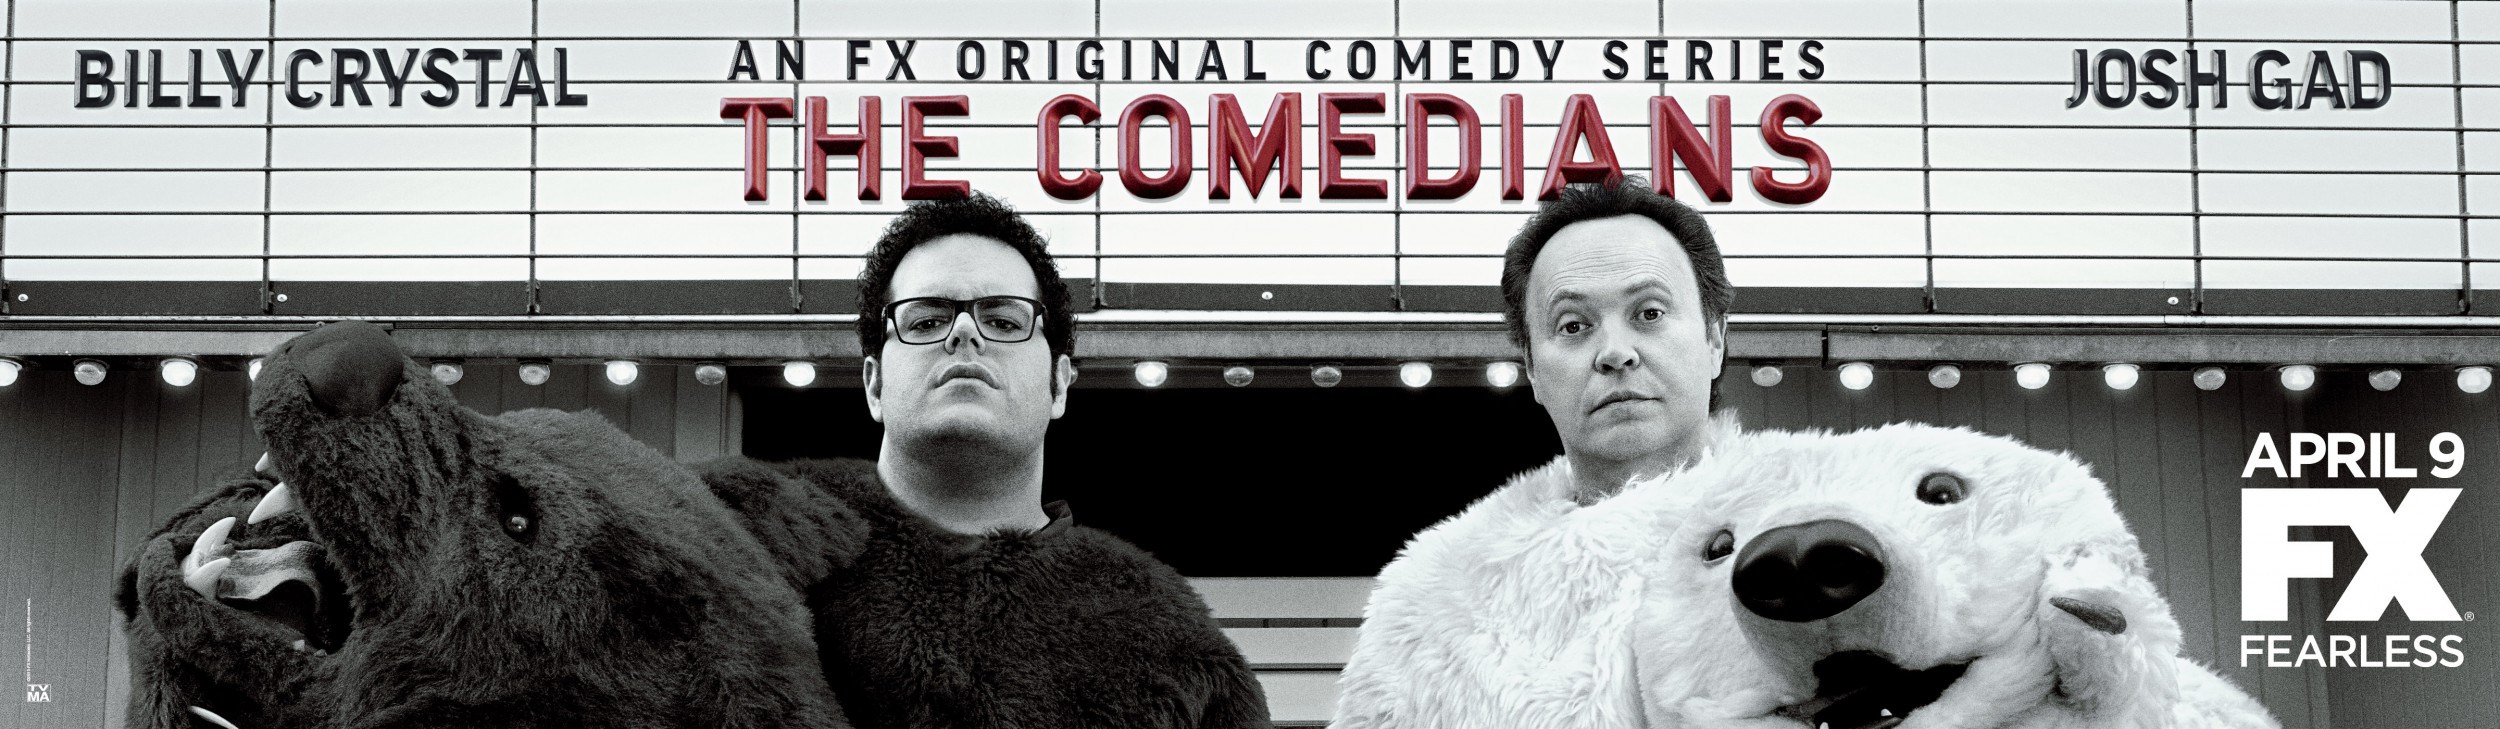 Mega Sized TV Poster Image for The Comedians (#3 of 3)